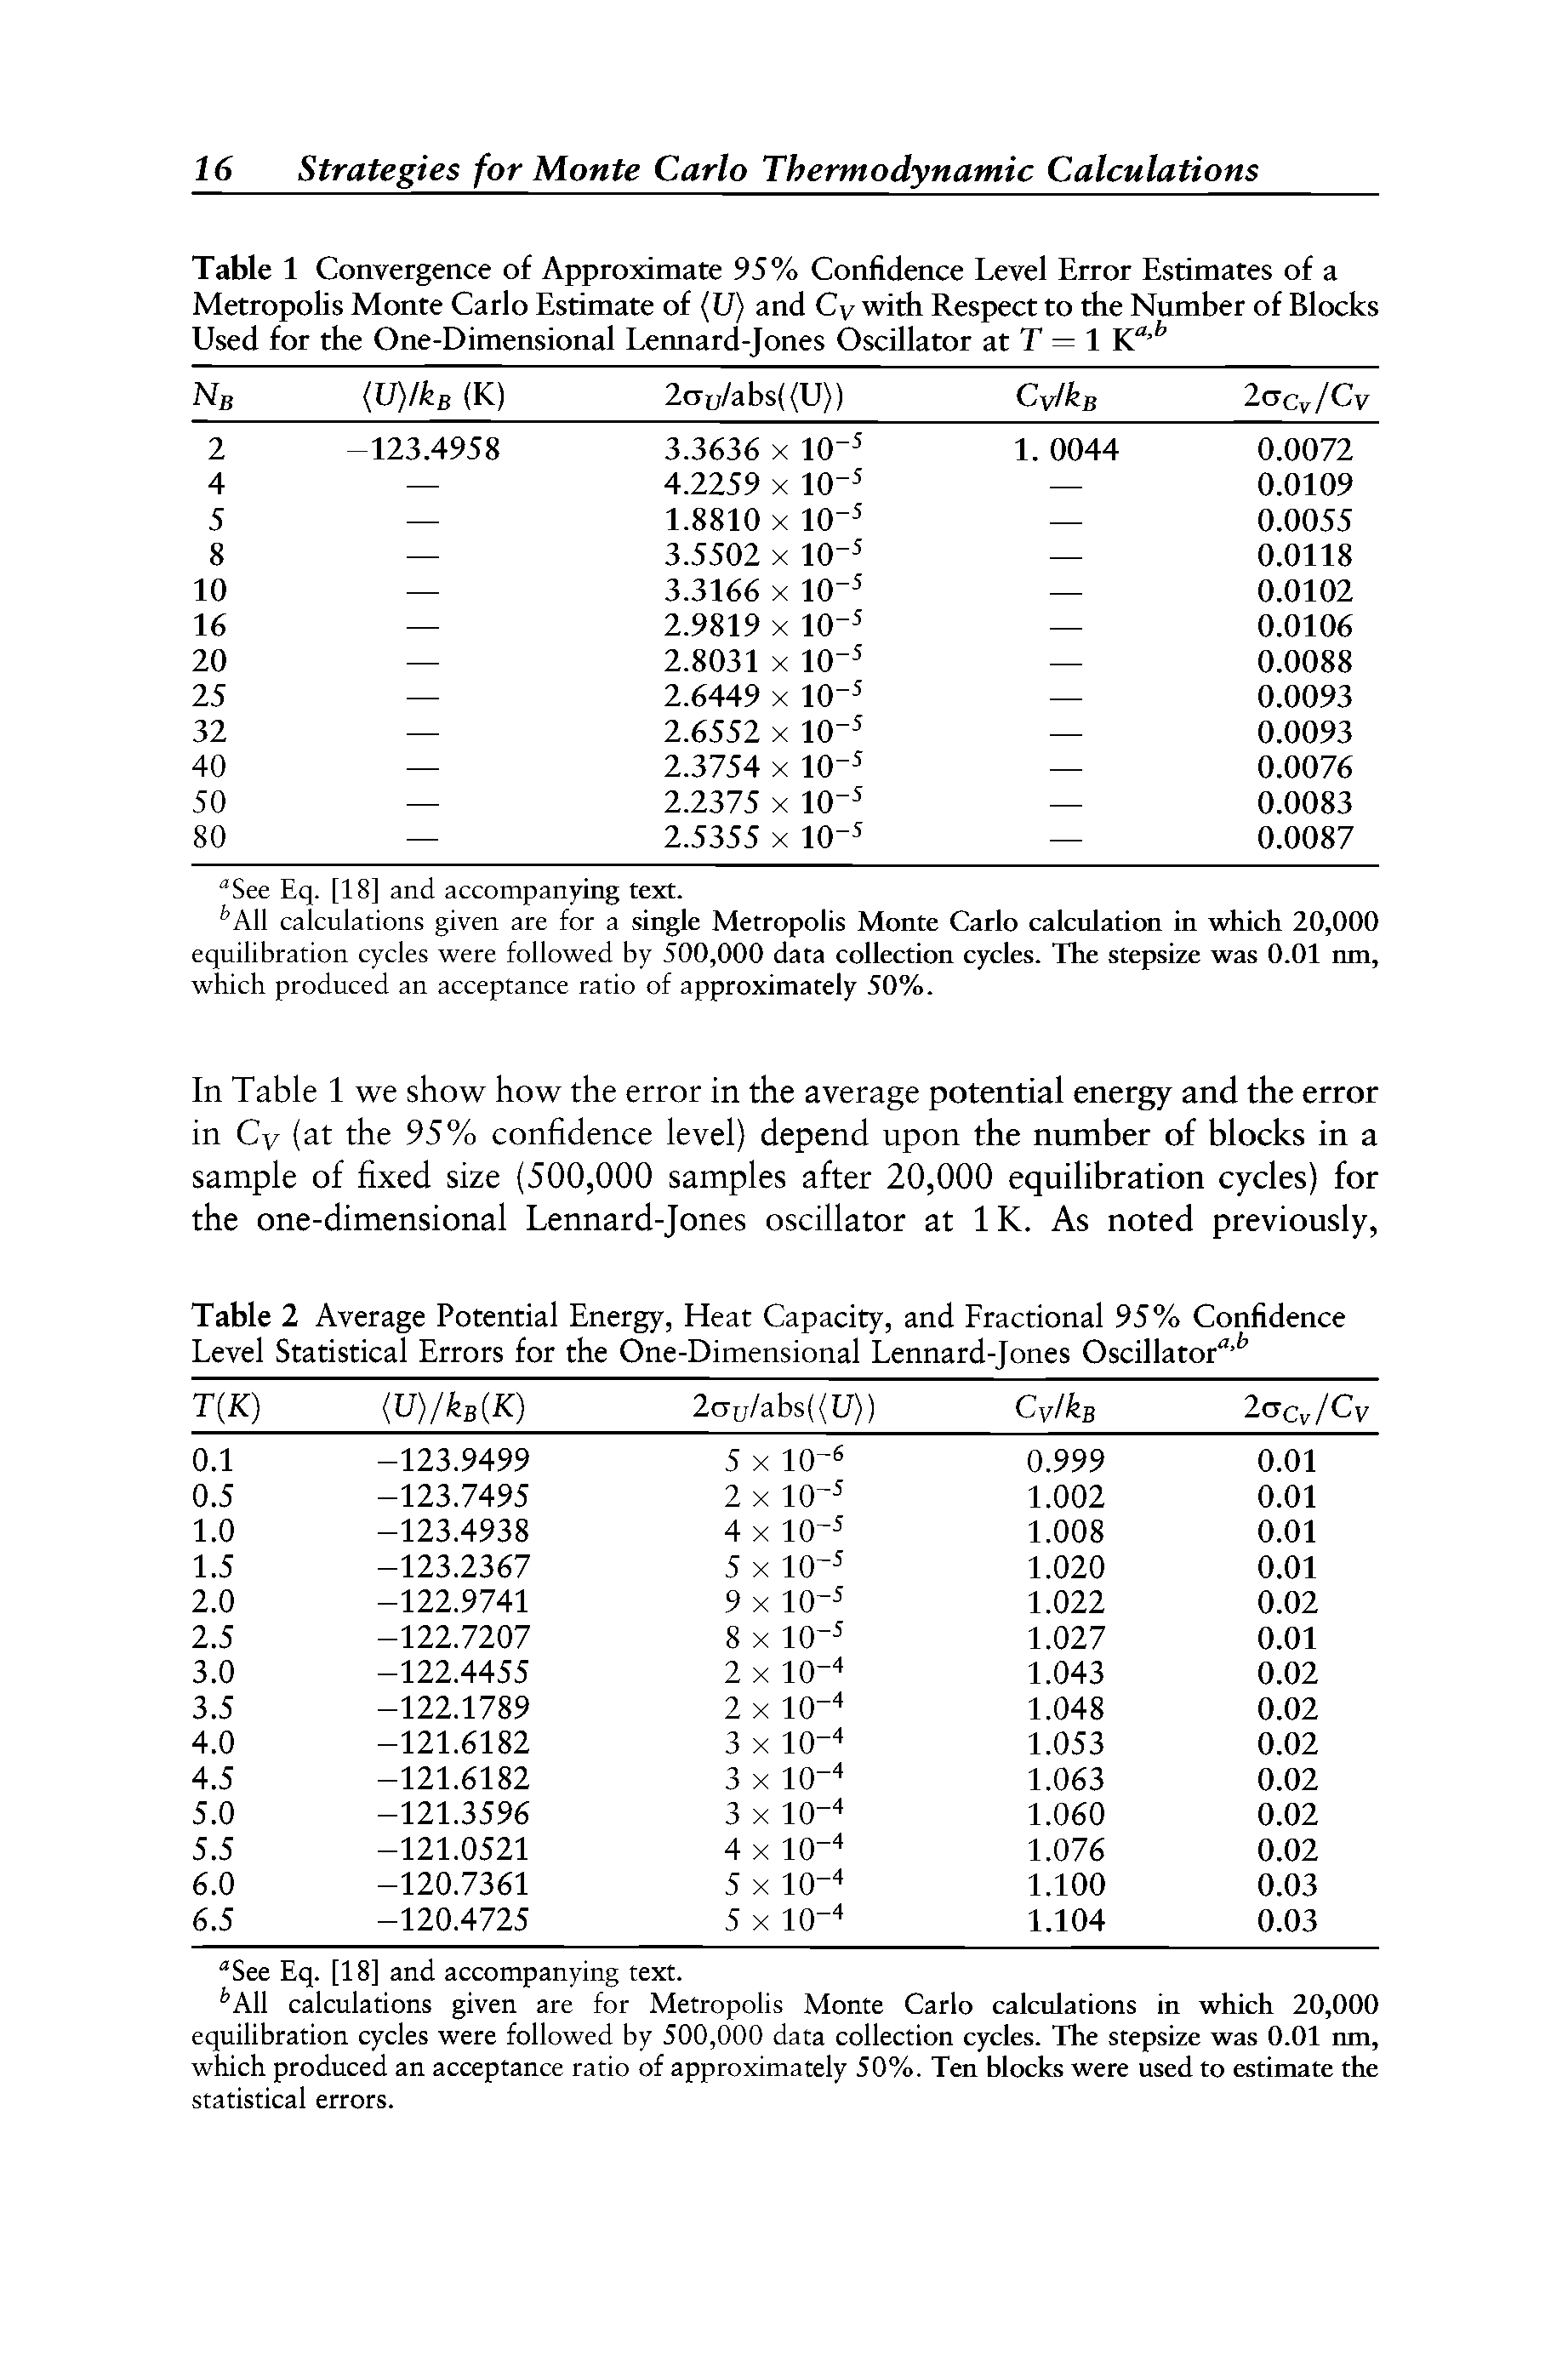 Table 2 Average Potential Energy, Heat Capacity, and Fractional 95% Confidence Level Statistical Errors for the One-Dimensional Lennard-Jones Oscillator ...